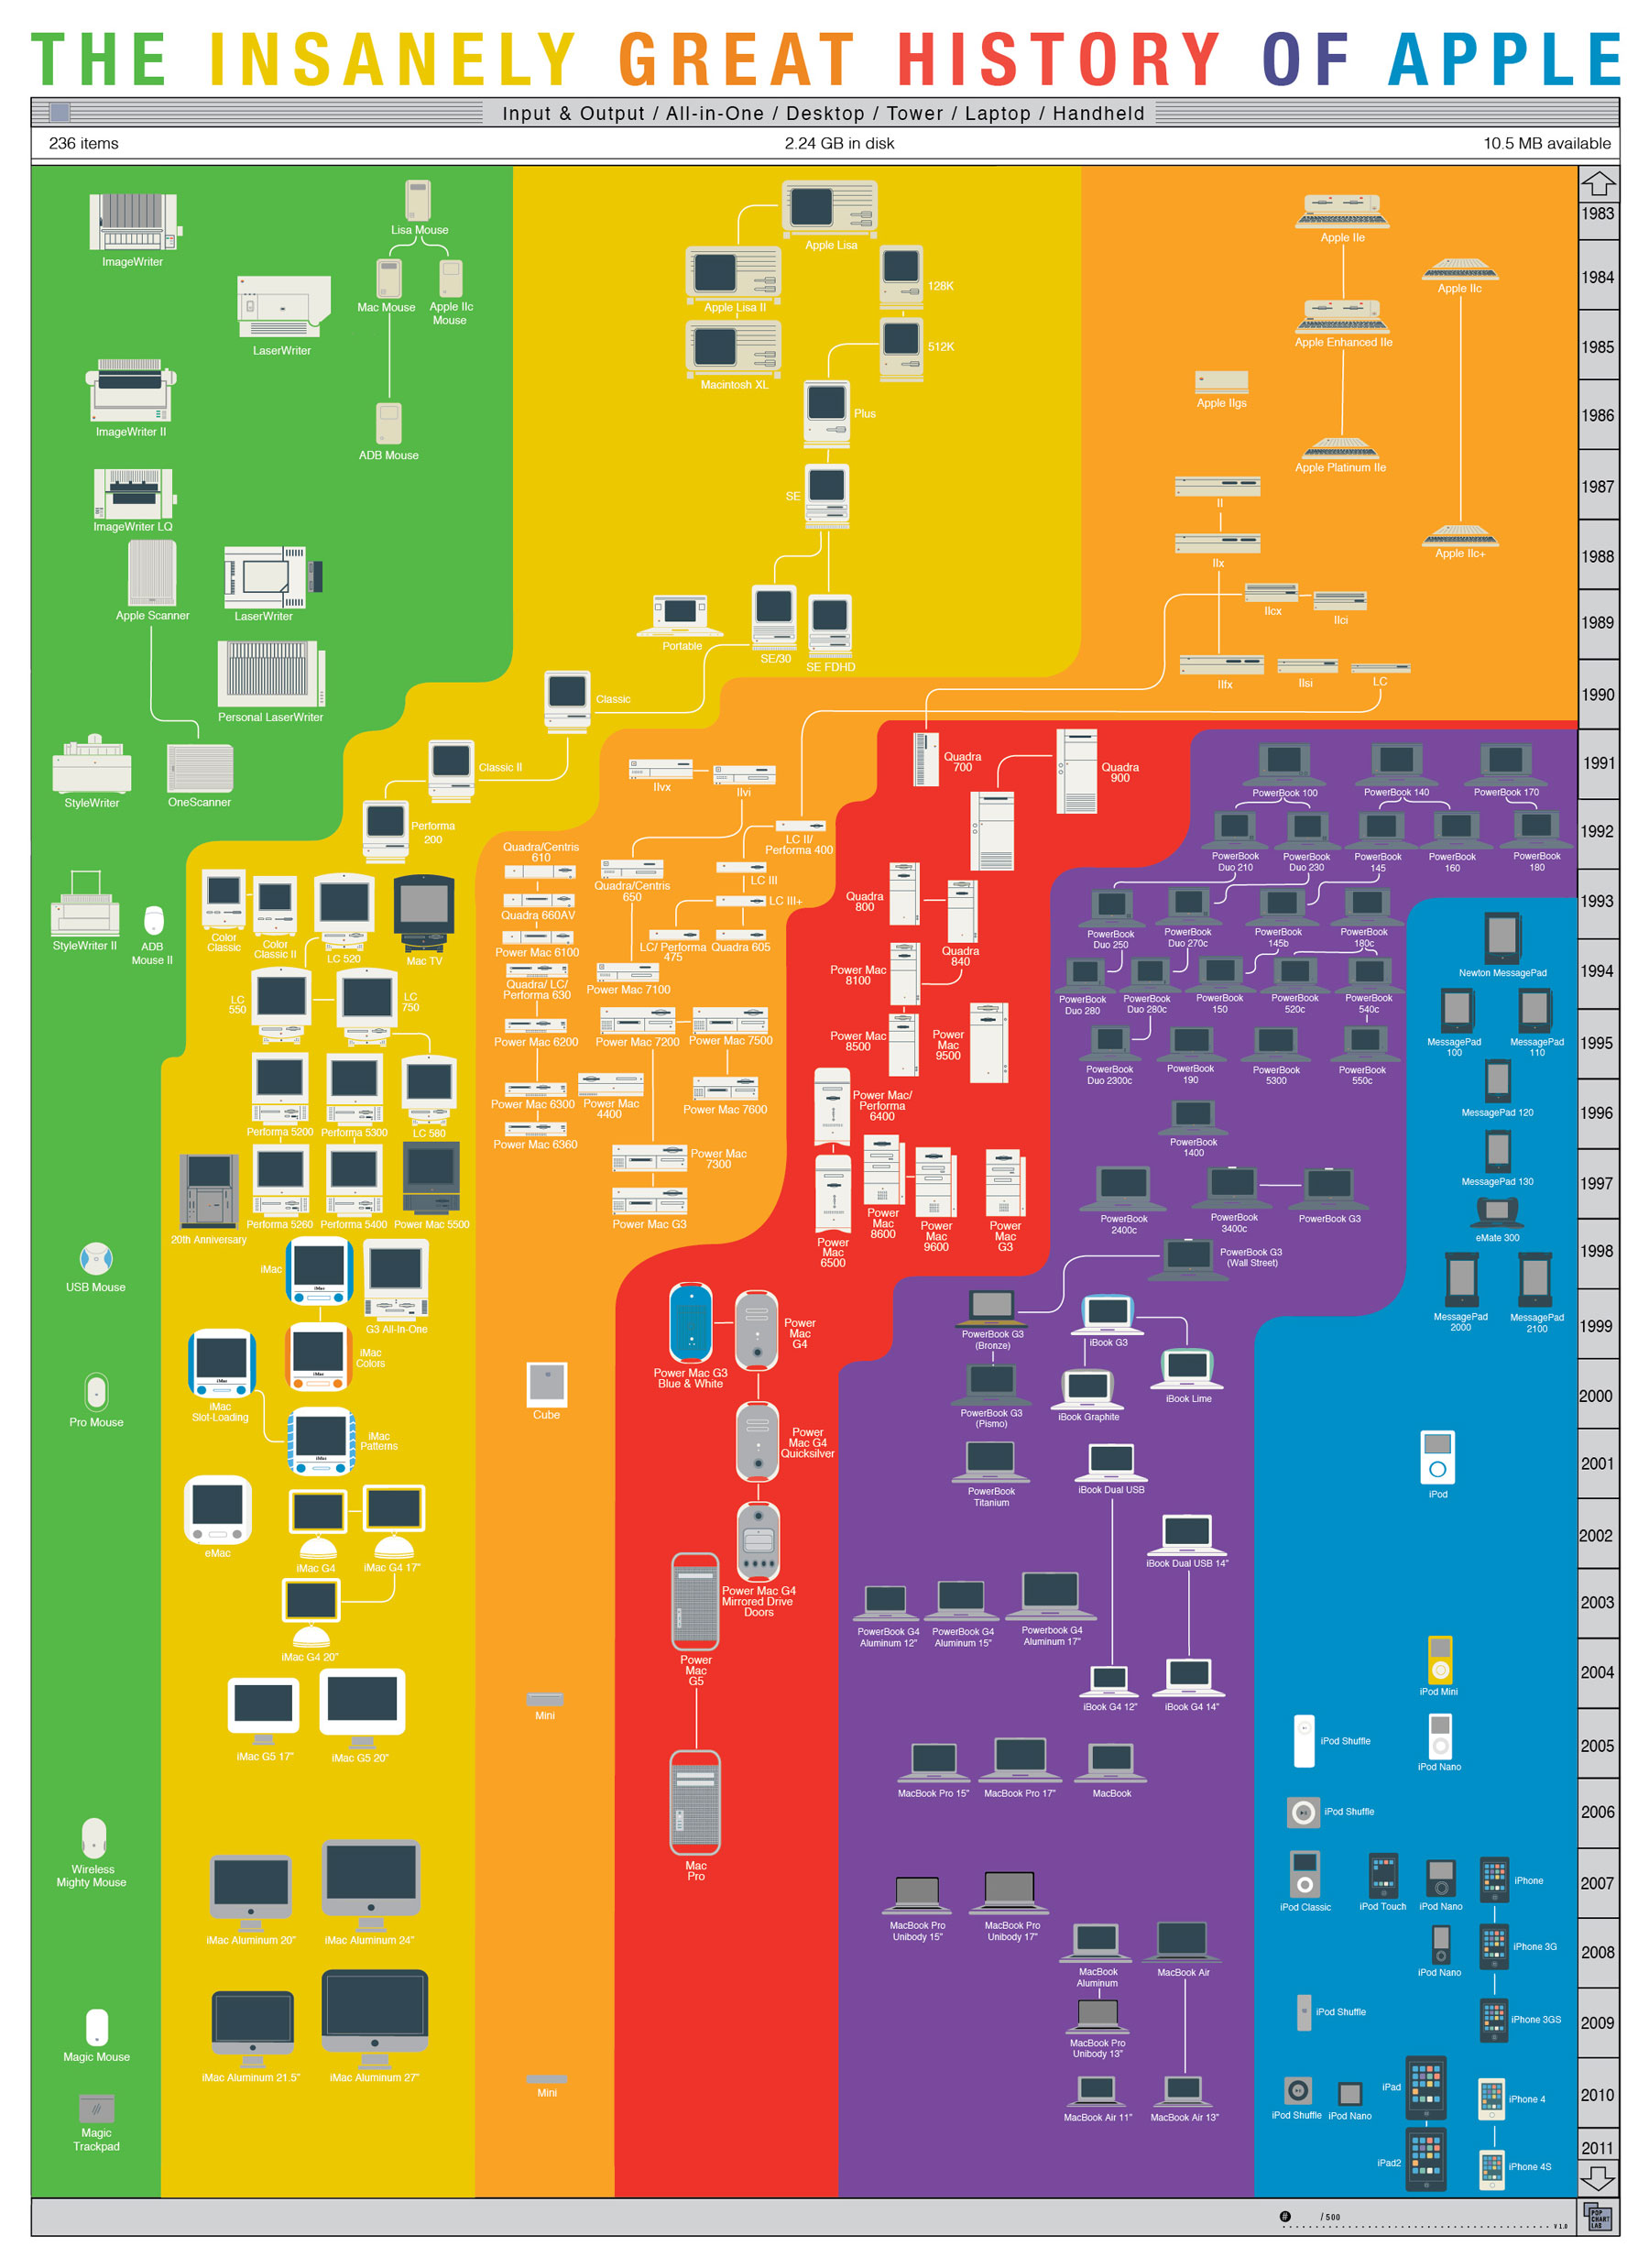 The Insanely Great History of Apple [INFOGRAPHIC]